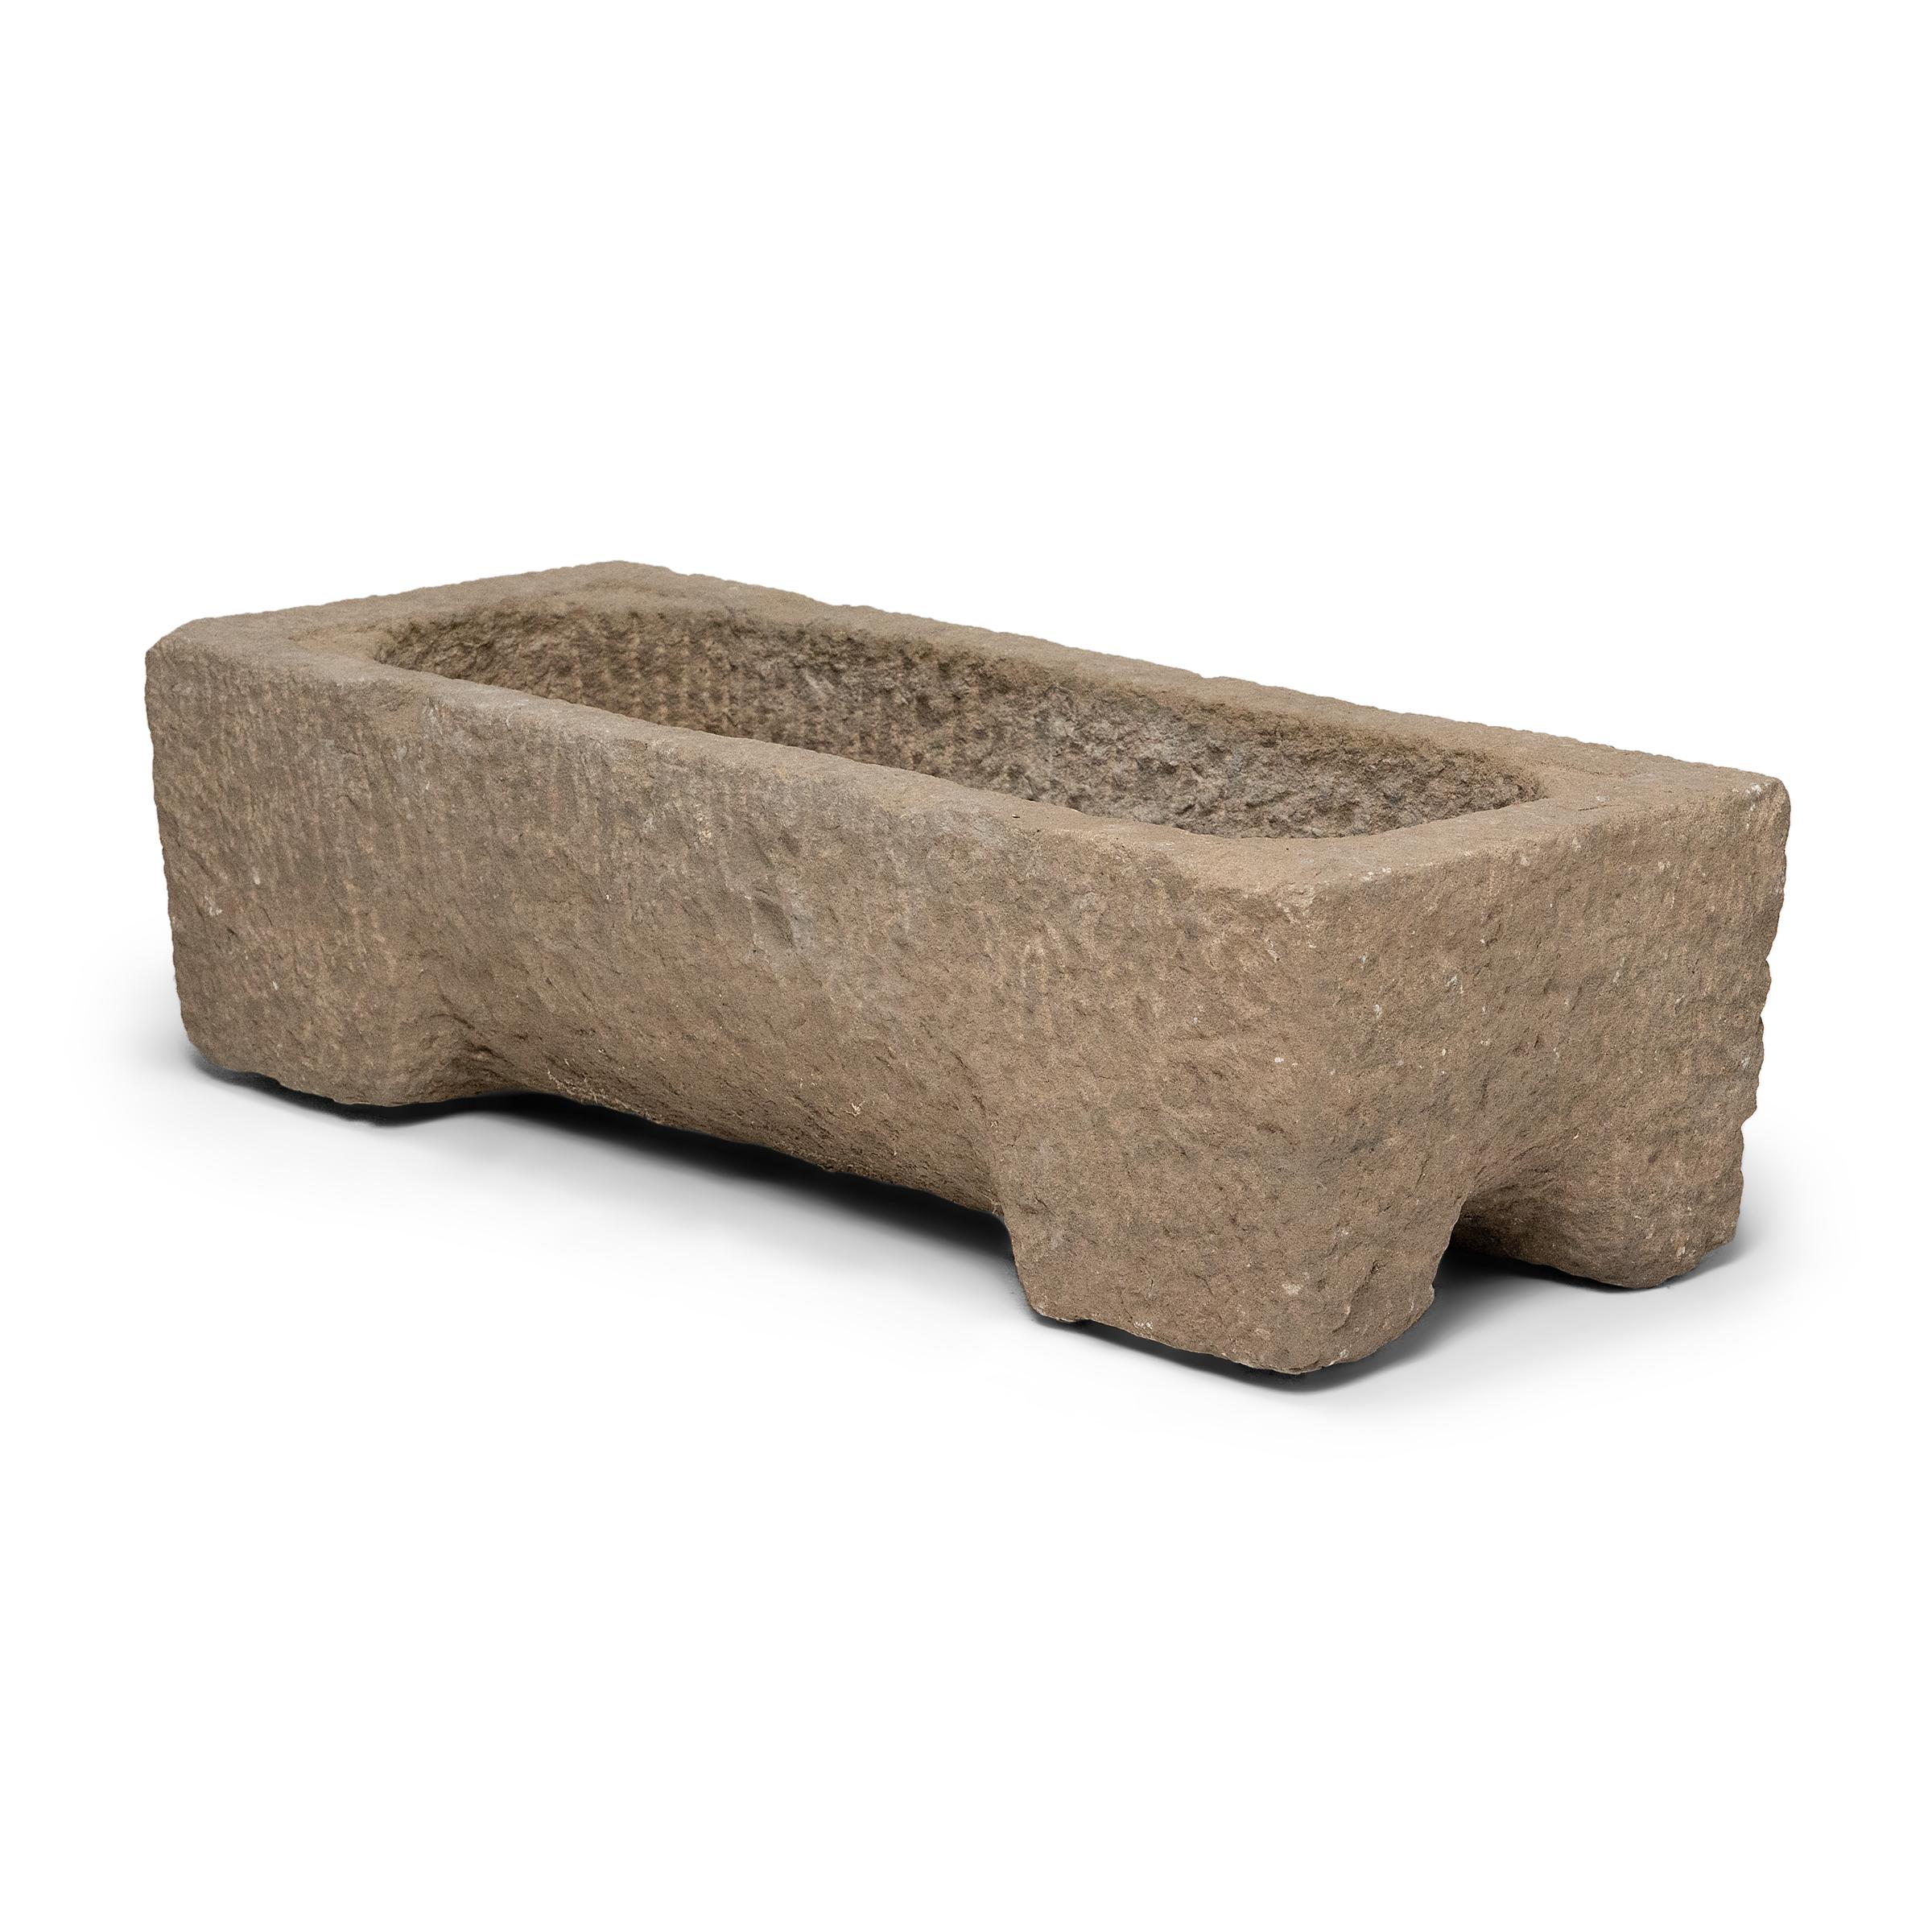 Once used on a provincial Chinese farm to hold water or animal feed, this early 20th-century stone trough is celebrated today for its organic form and rustic authenticity. The footed trough has a rectangular form and shallow, oval basin, hand-shaped